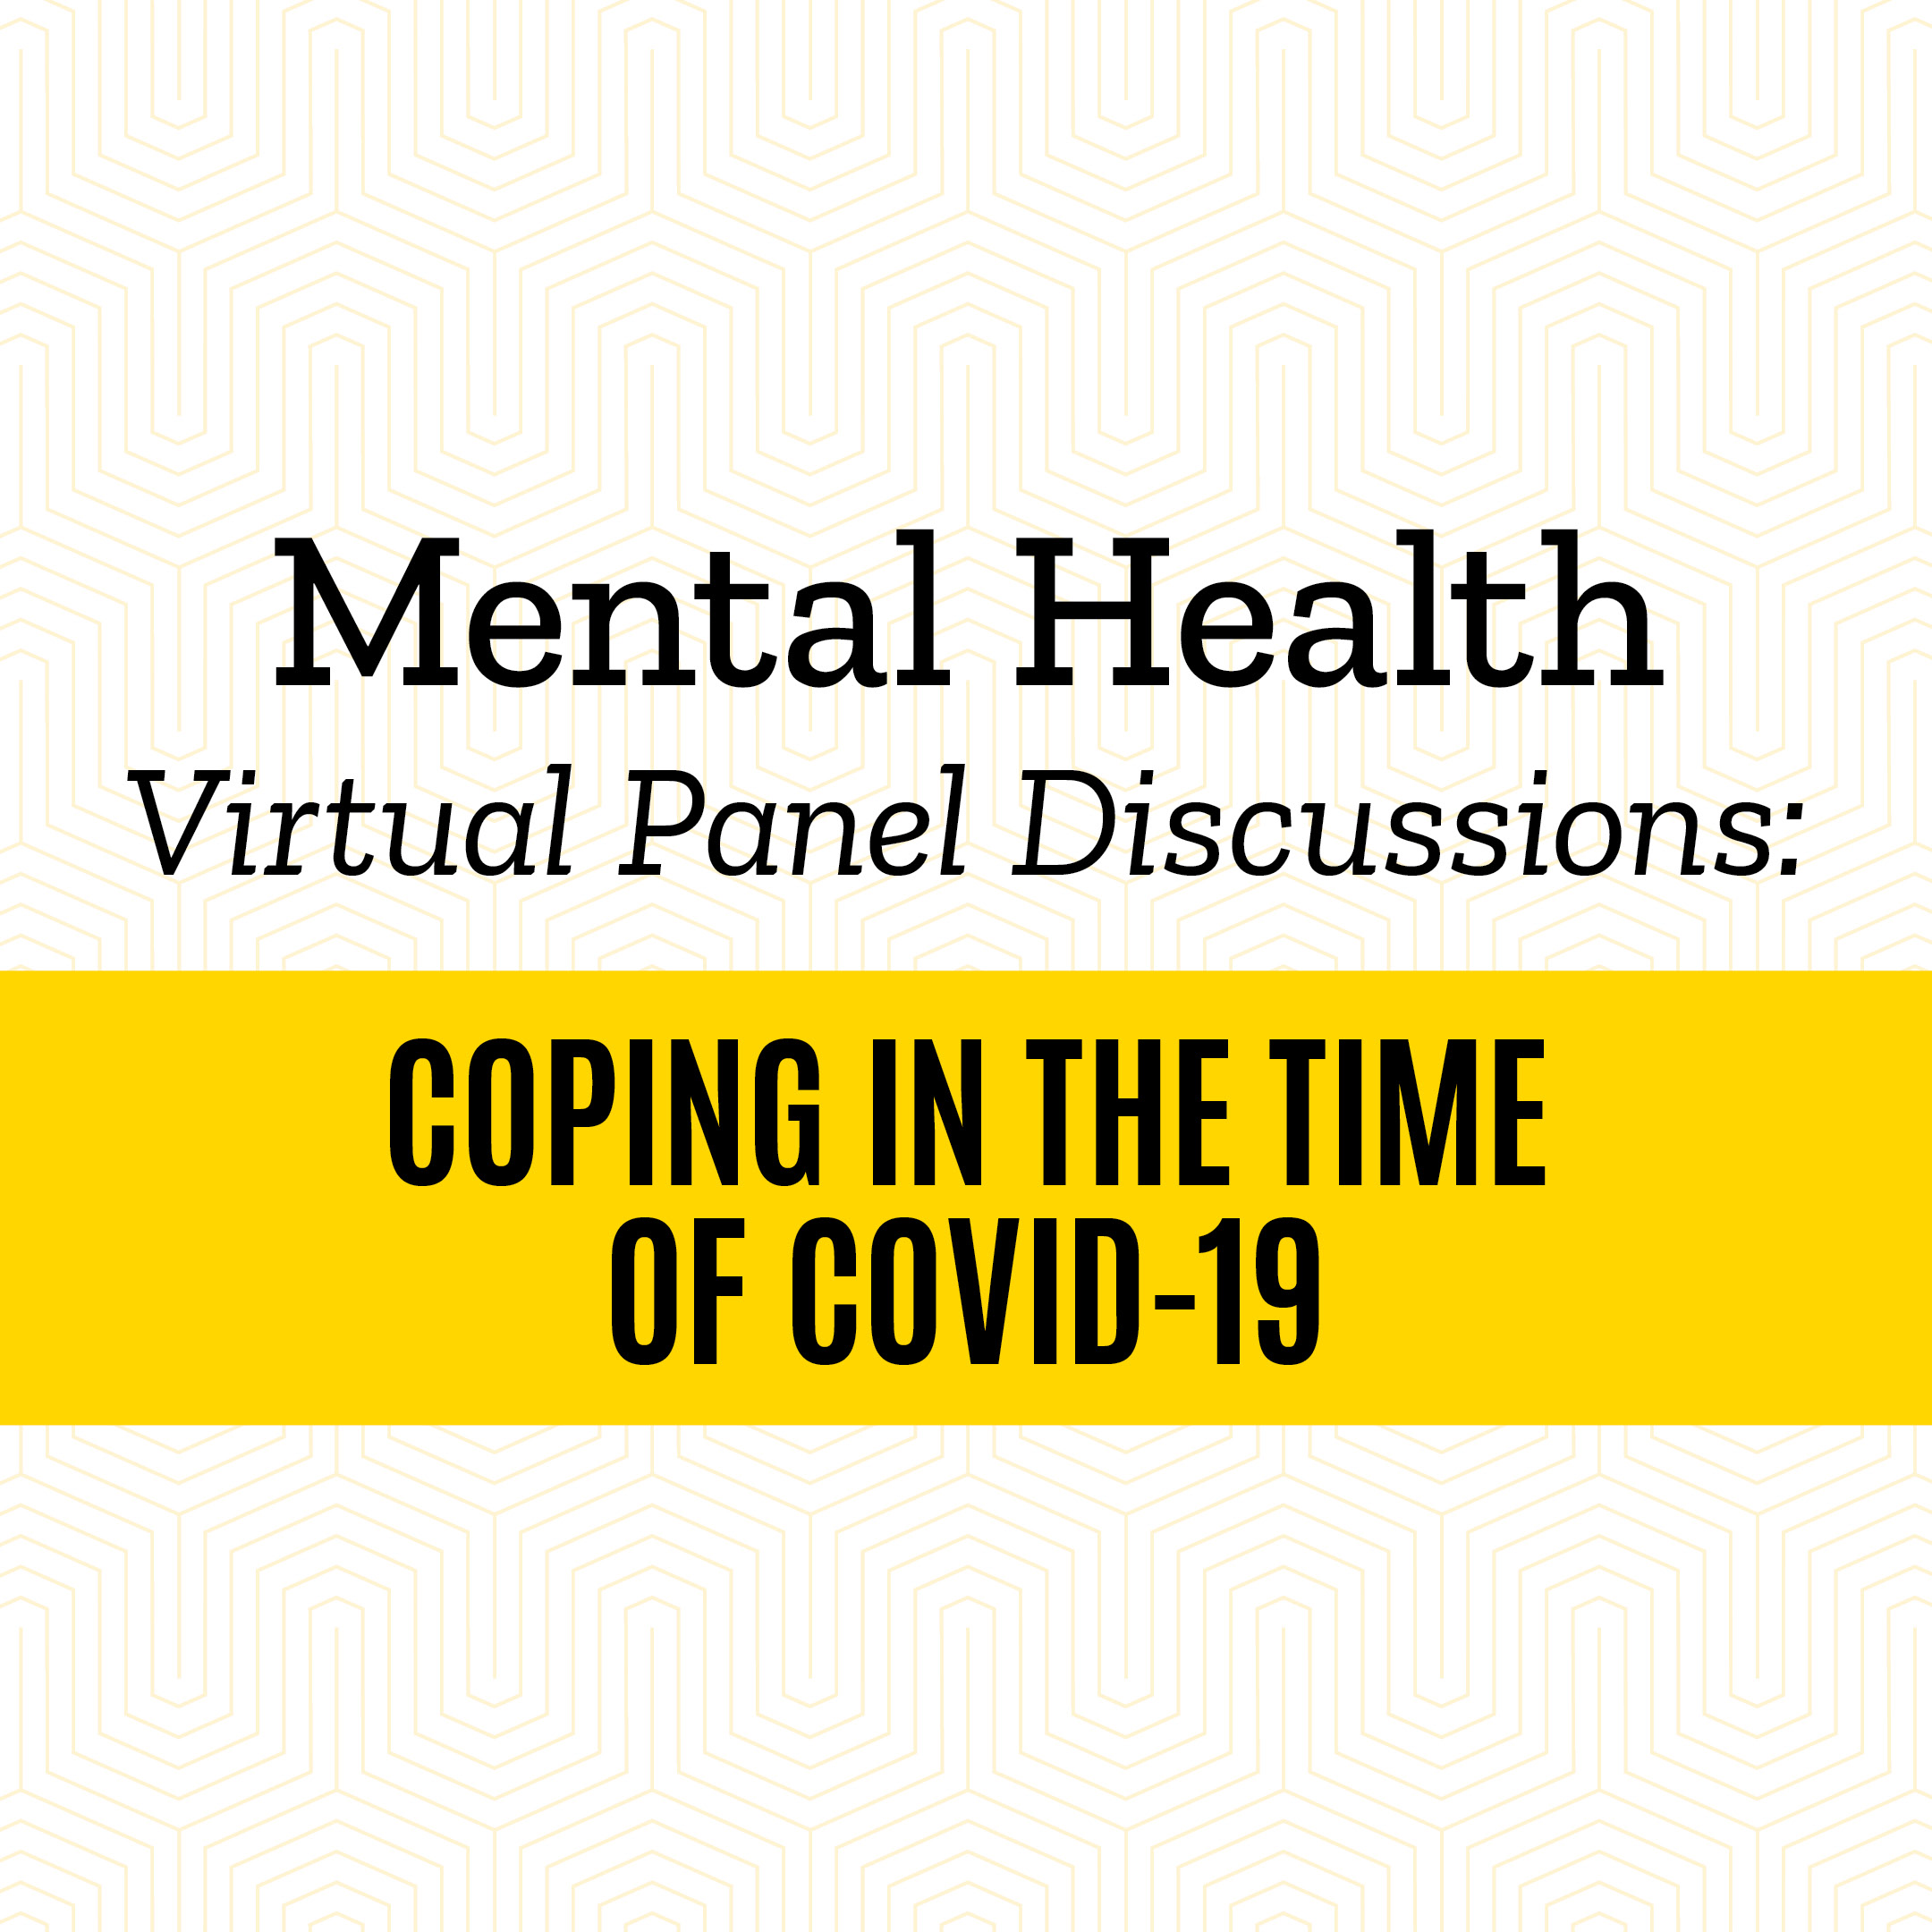 Mental Health Virtual Panel Discussions: Coping in the time of COVID-19